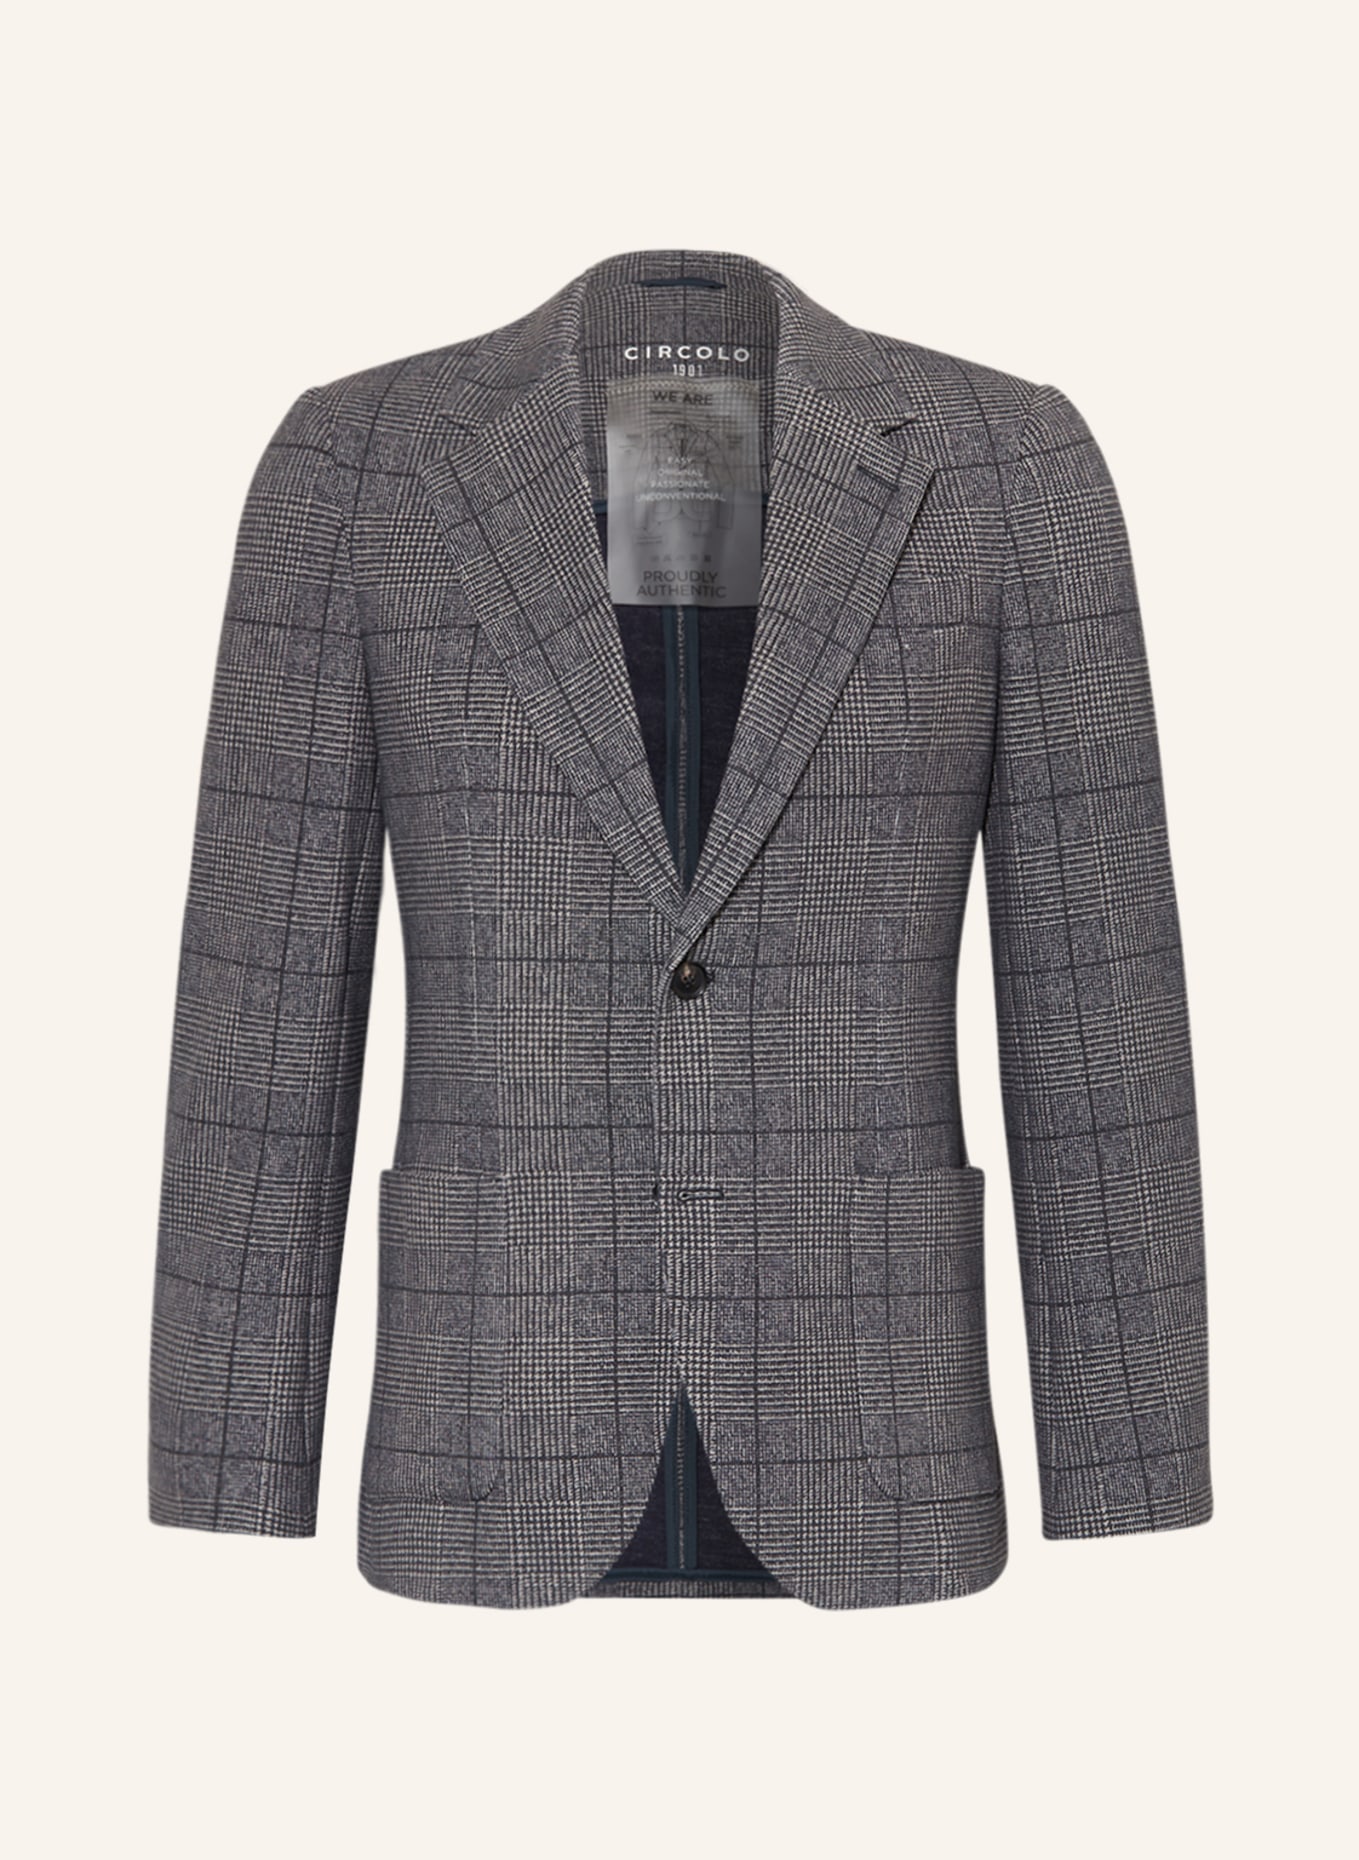 CIRCOLO 1901 Suit jacket extra slim fit made of jersey, Color: DARK BLUE/ LIGHT GRAY (Image 1)